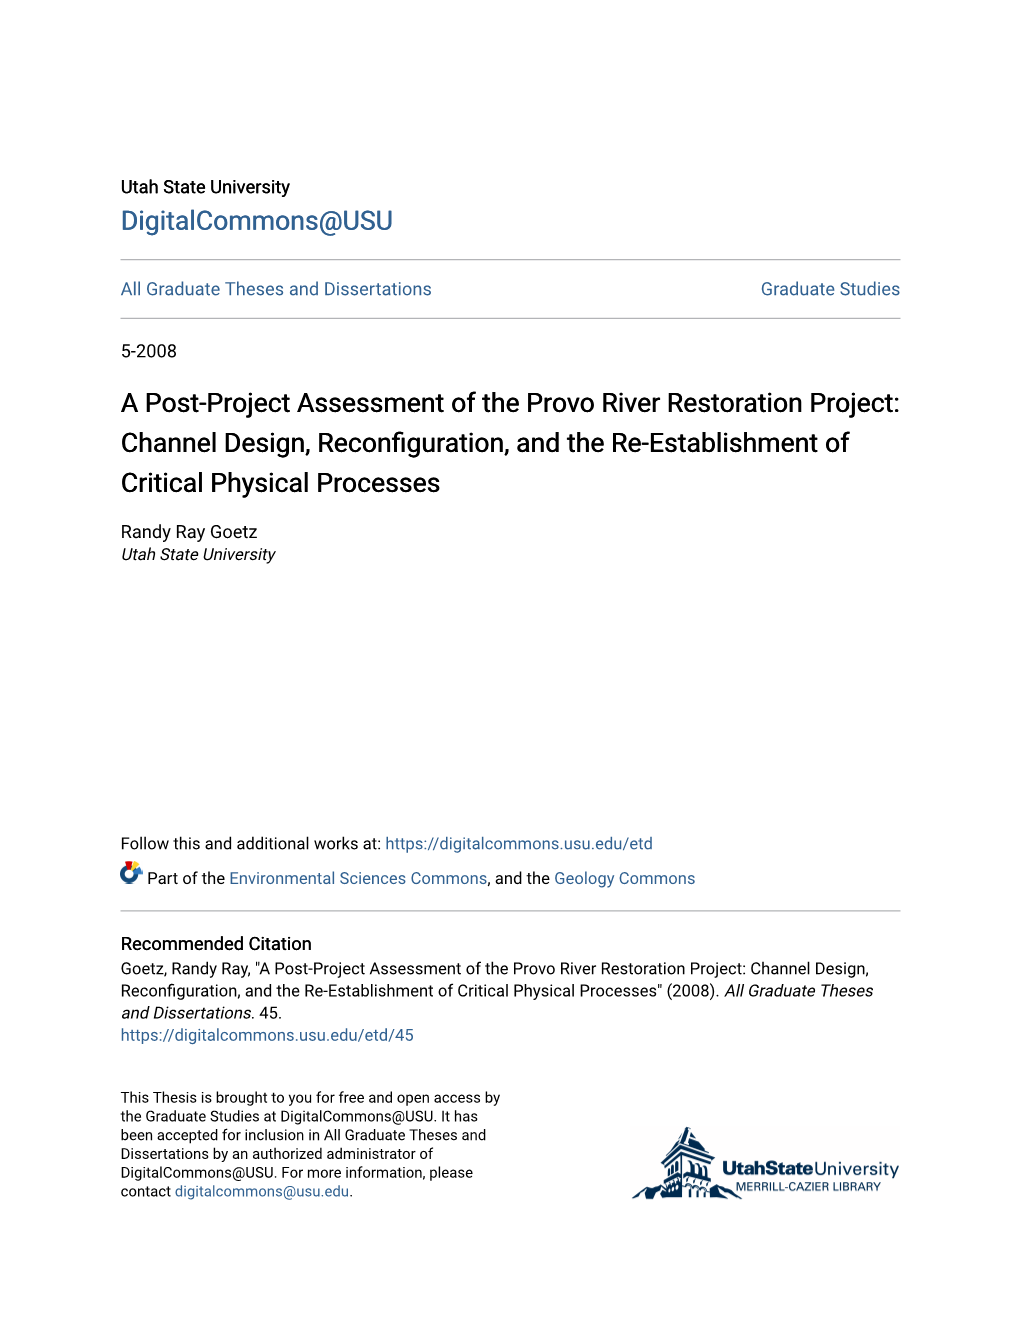 A Post-Project Assessment of the Provo River Restoration Project: Channel Design, Reconfiguration, and the Re-Establishment of Critical Physical Processes